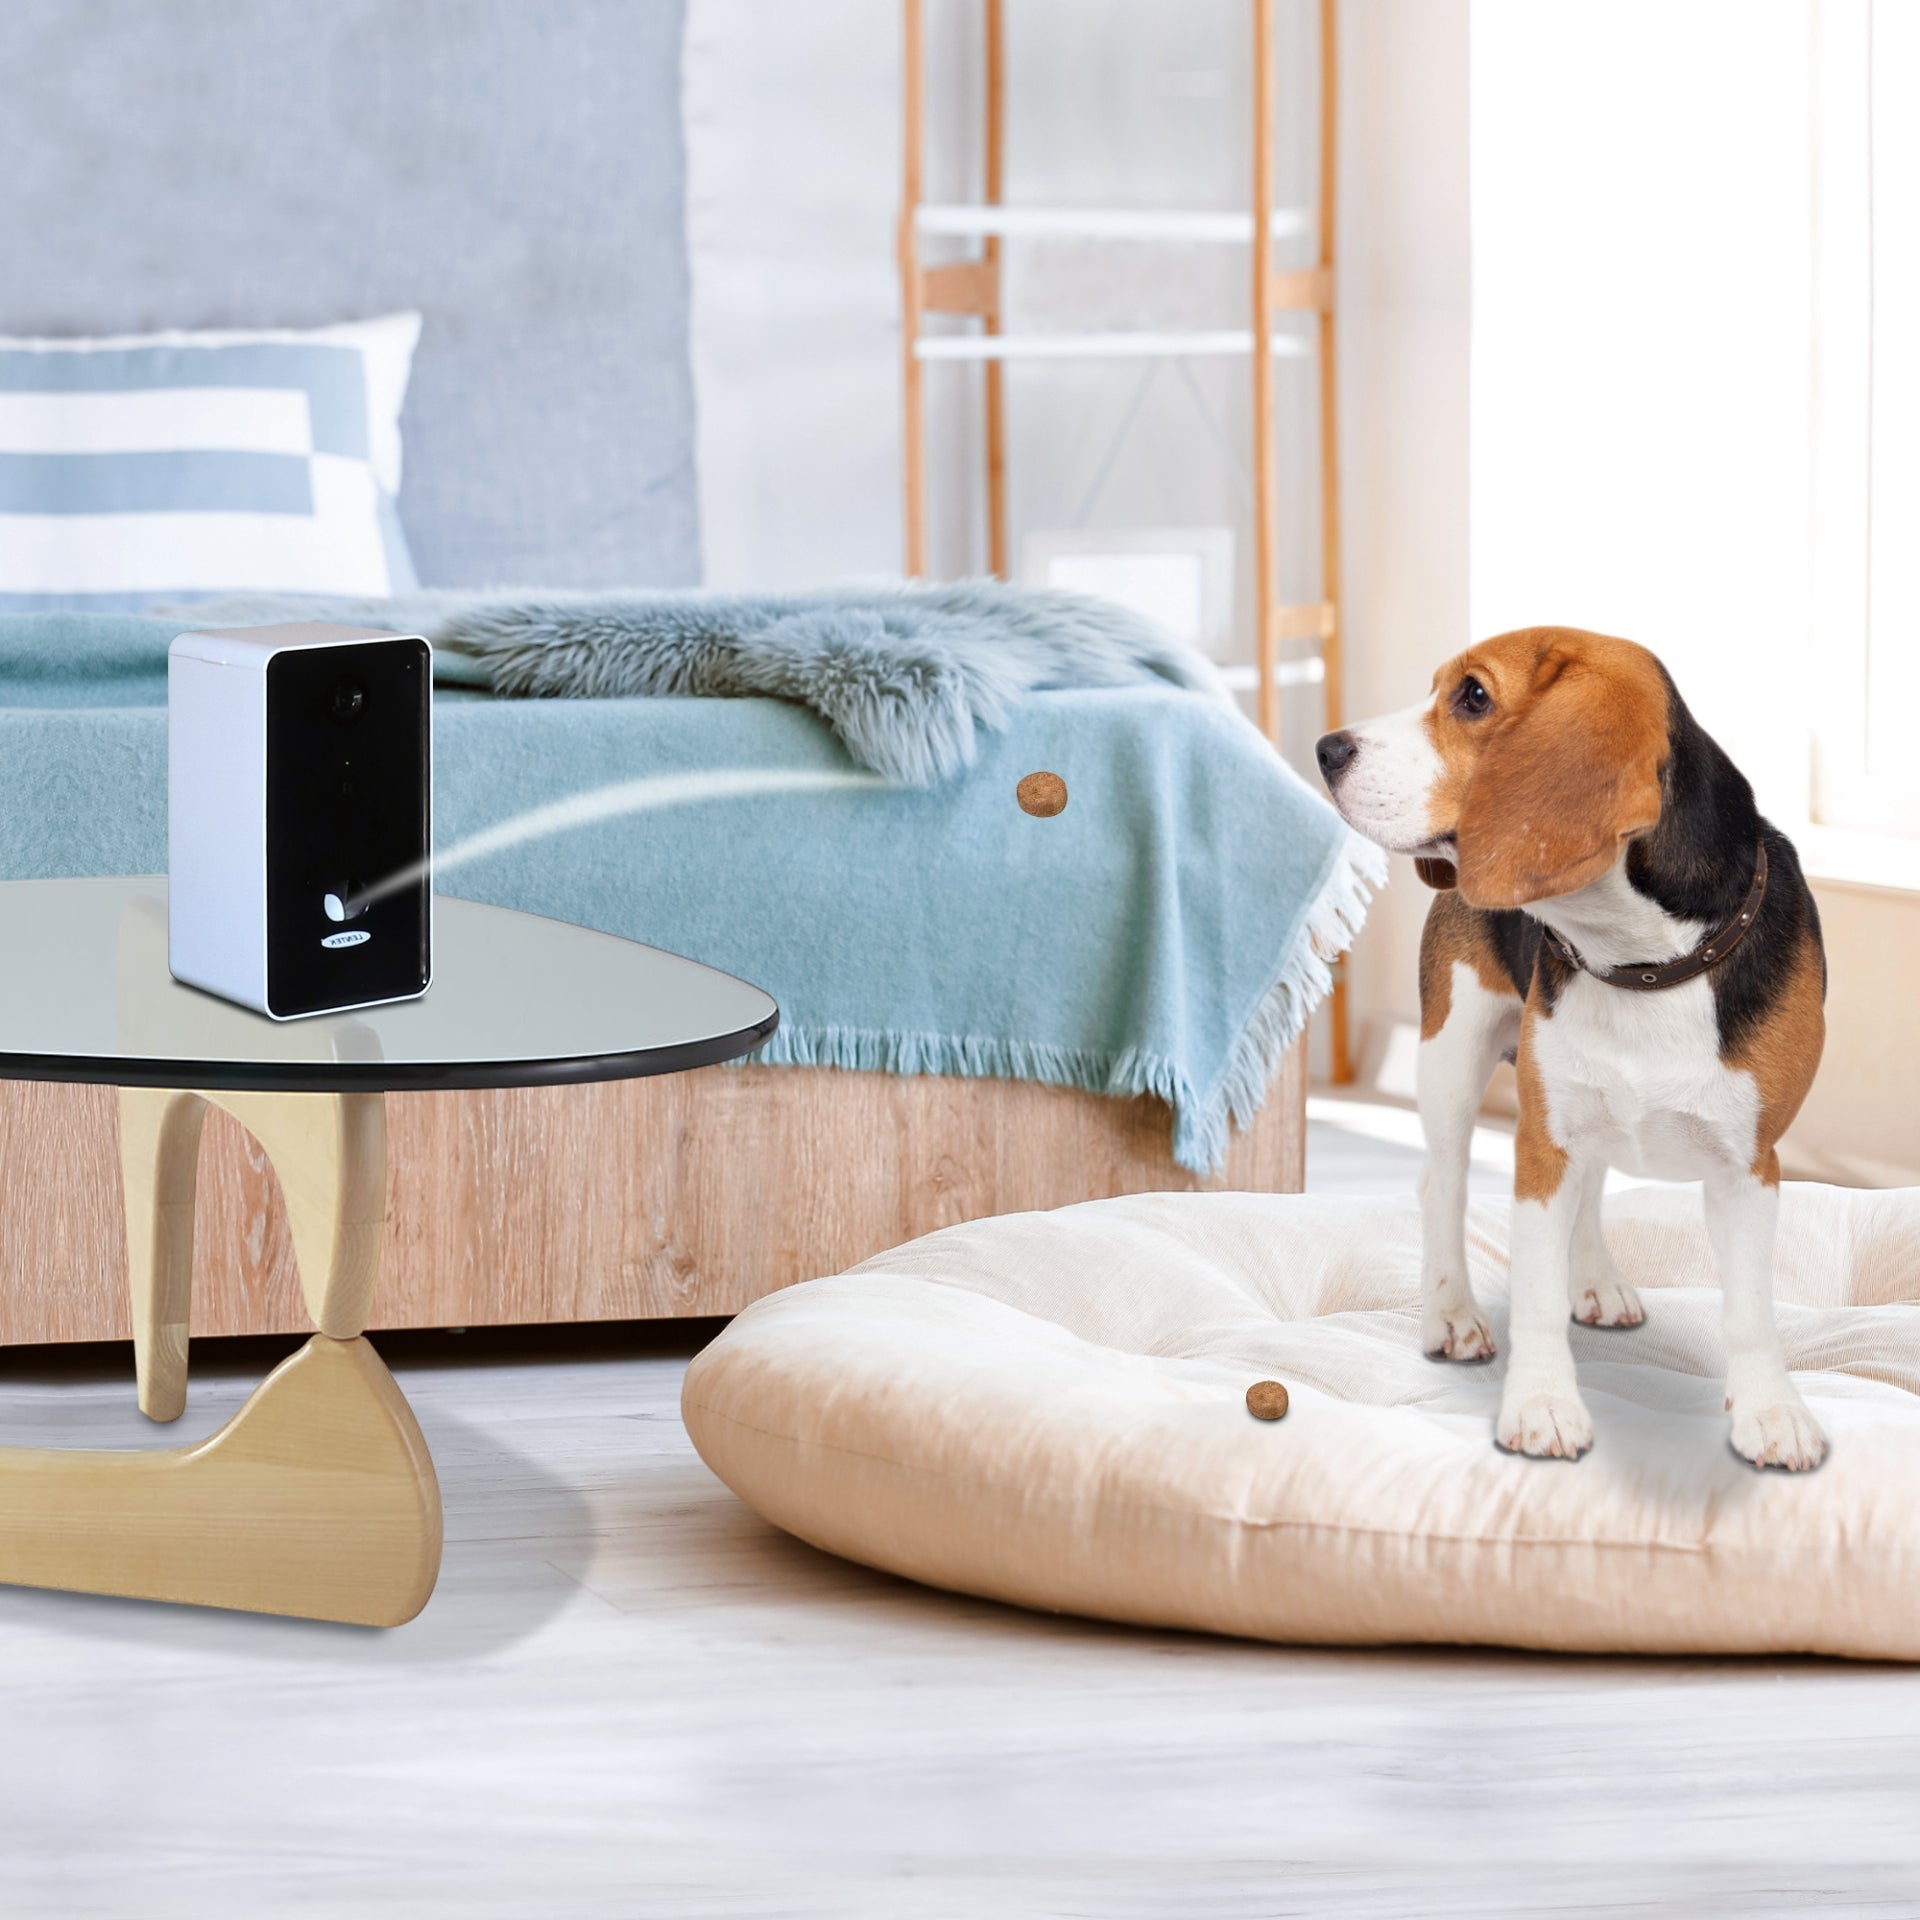 PT01 Lentek Smart Pet Treat Tosser with HD Video, 2-Way Audio - Lifestyle image of beagle watching as the unit tosses a treat towards it